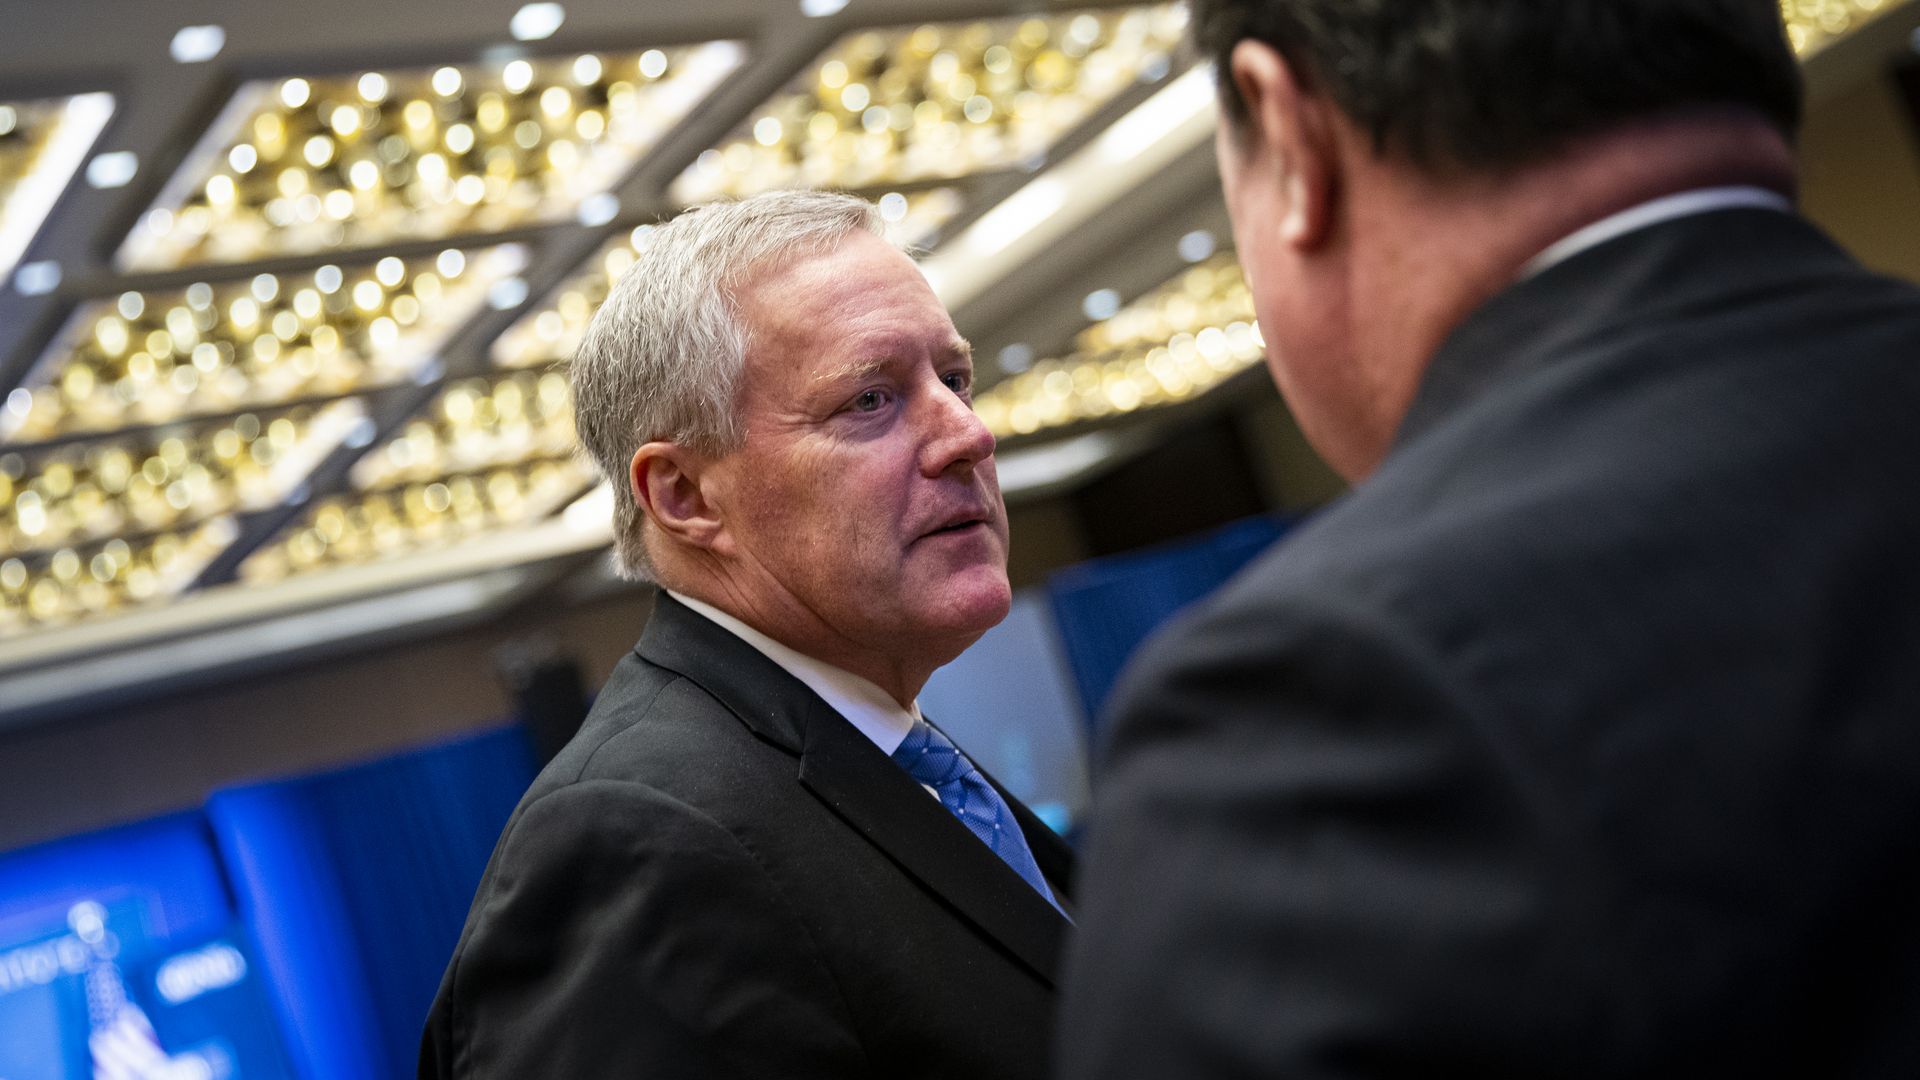 Mark Meadows, former White House chief of staff, speaks with an attendee during the America First Policy Institute's America First Agenda summit in Washington, D.C., US, on Monday, July 25, 2022. 